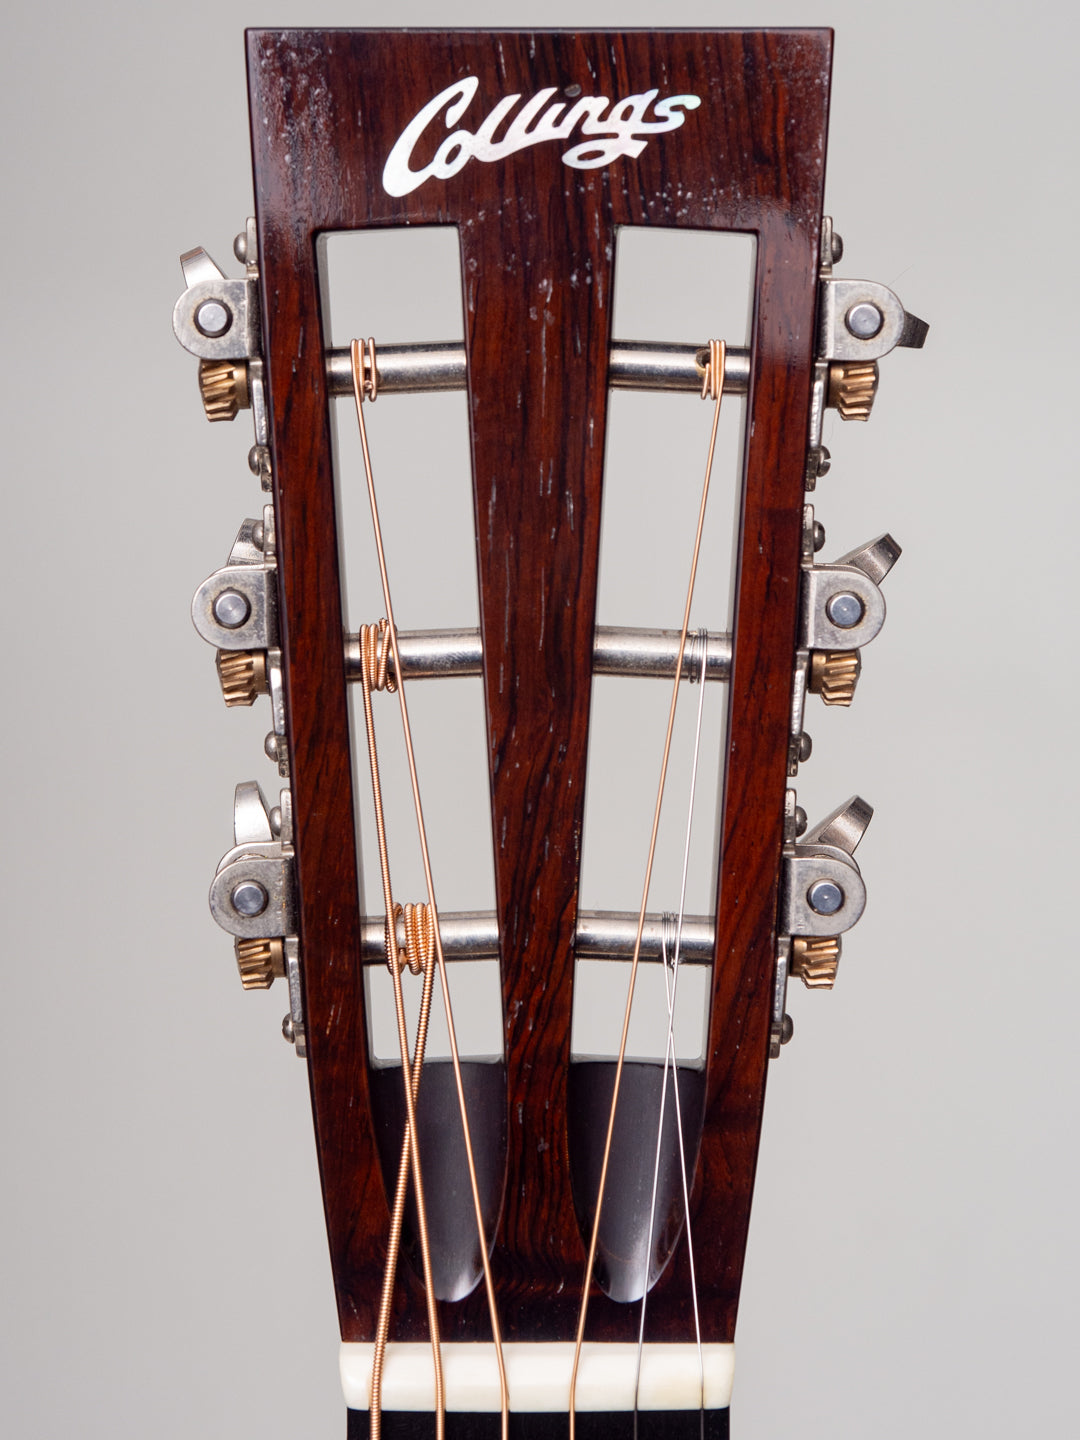 2000 Collings 001-A